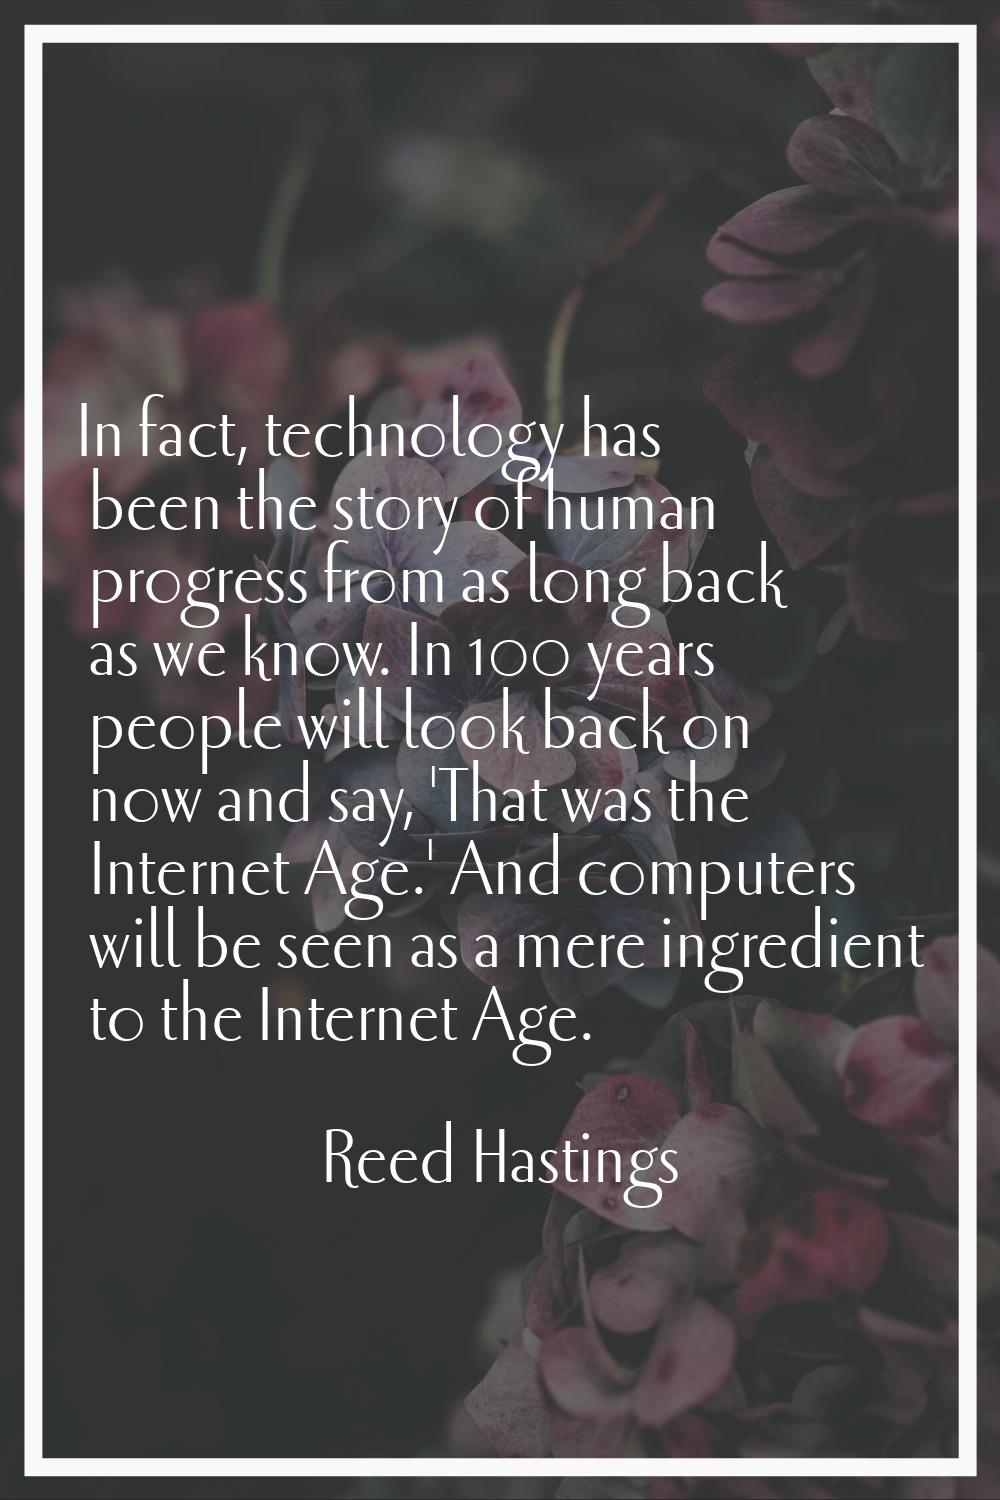 In fact, technology has been the story of human progress from as long back as we know. In 100 years